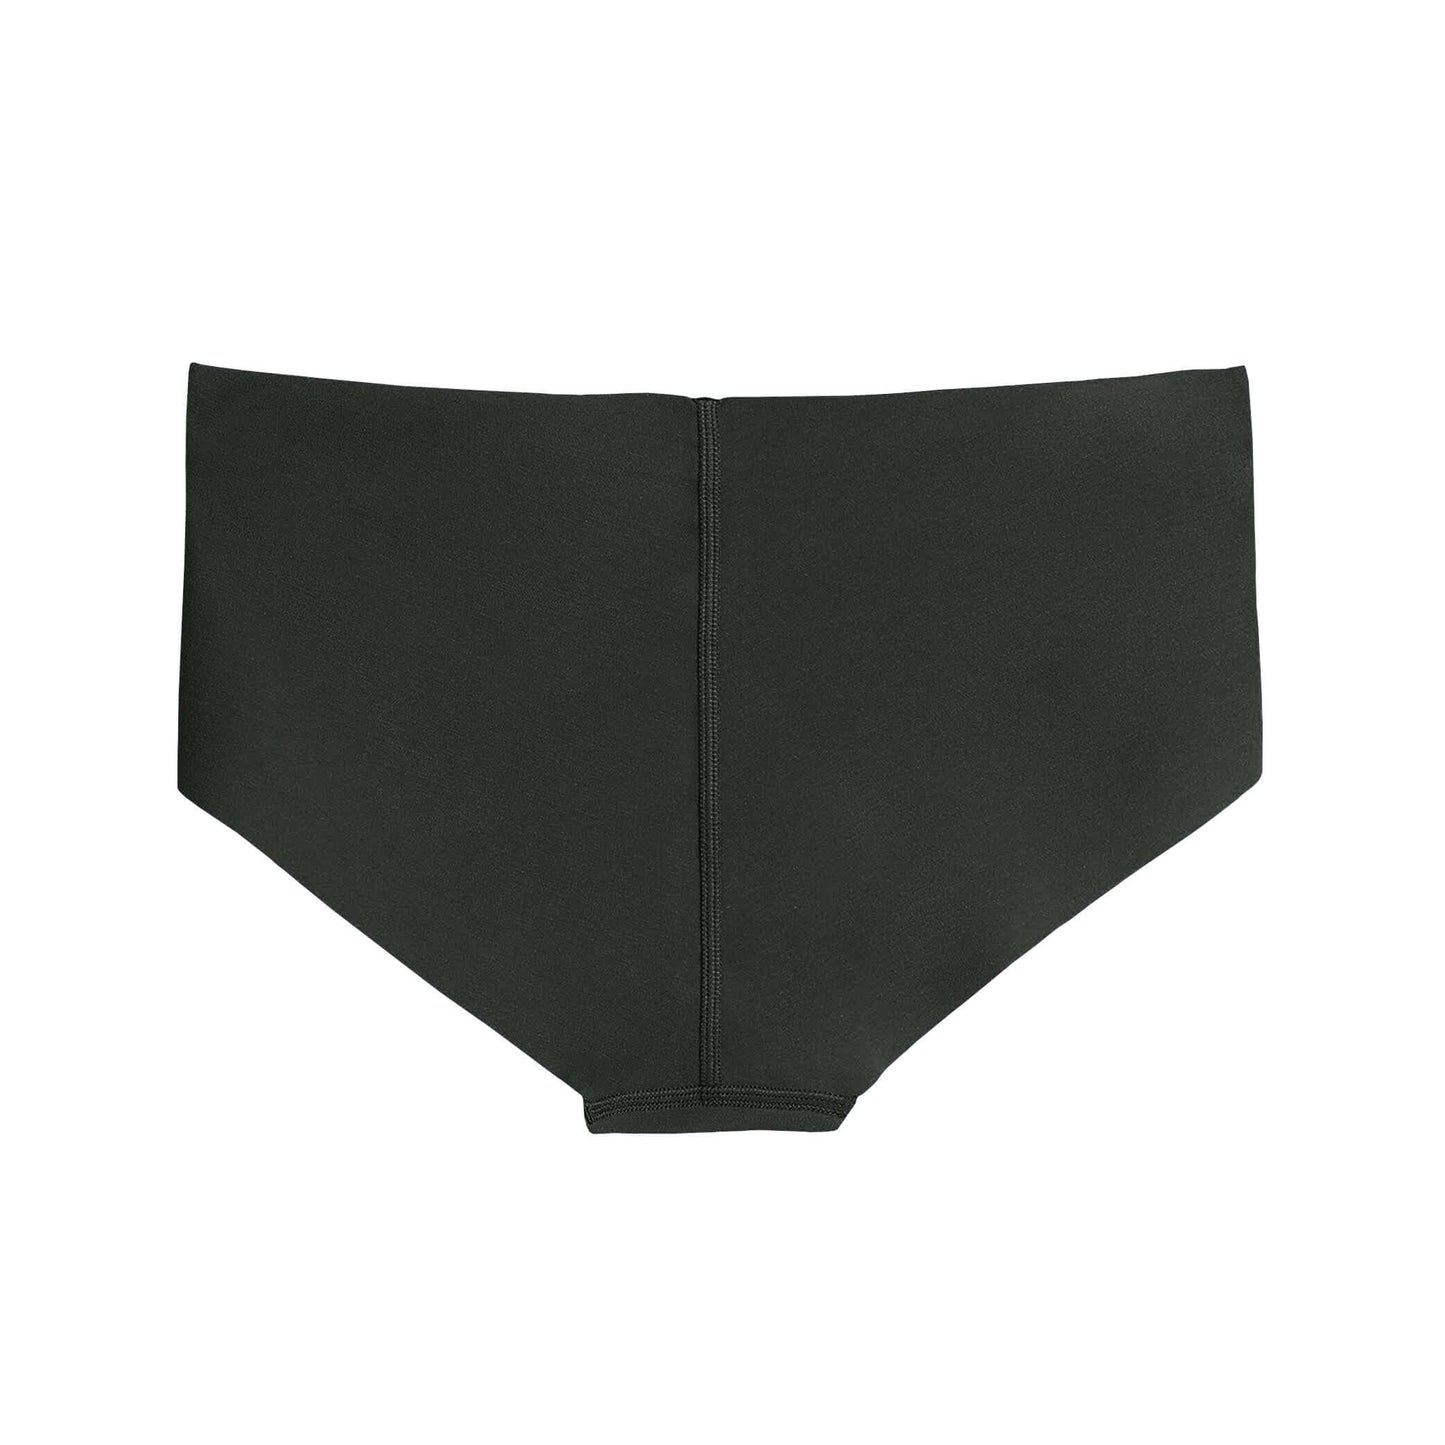 Buy Black Panty with Soft Fur(Free Size) at